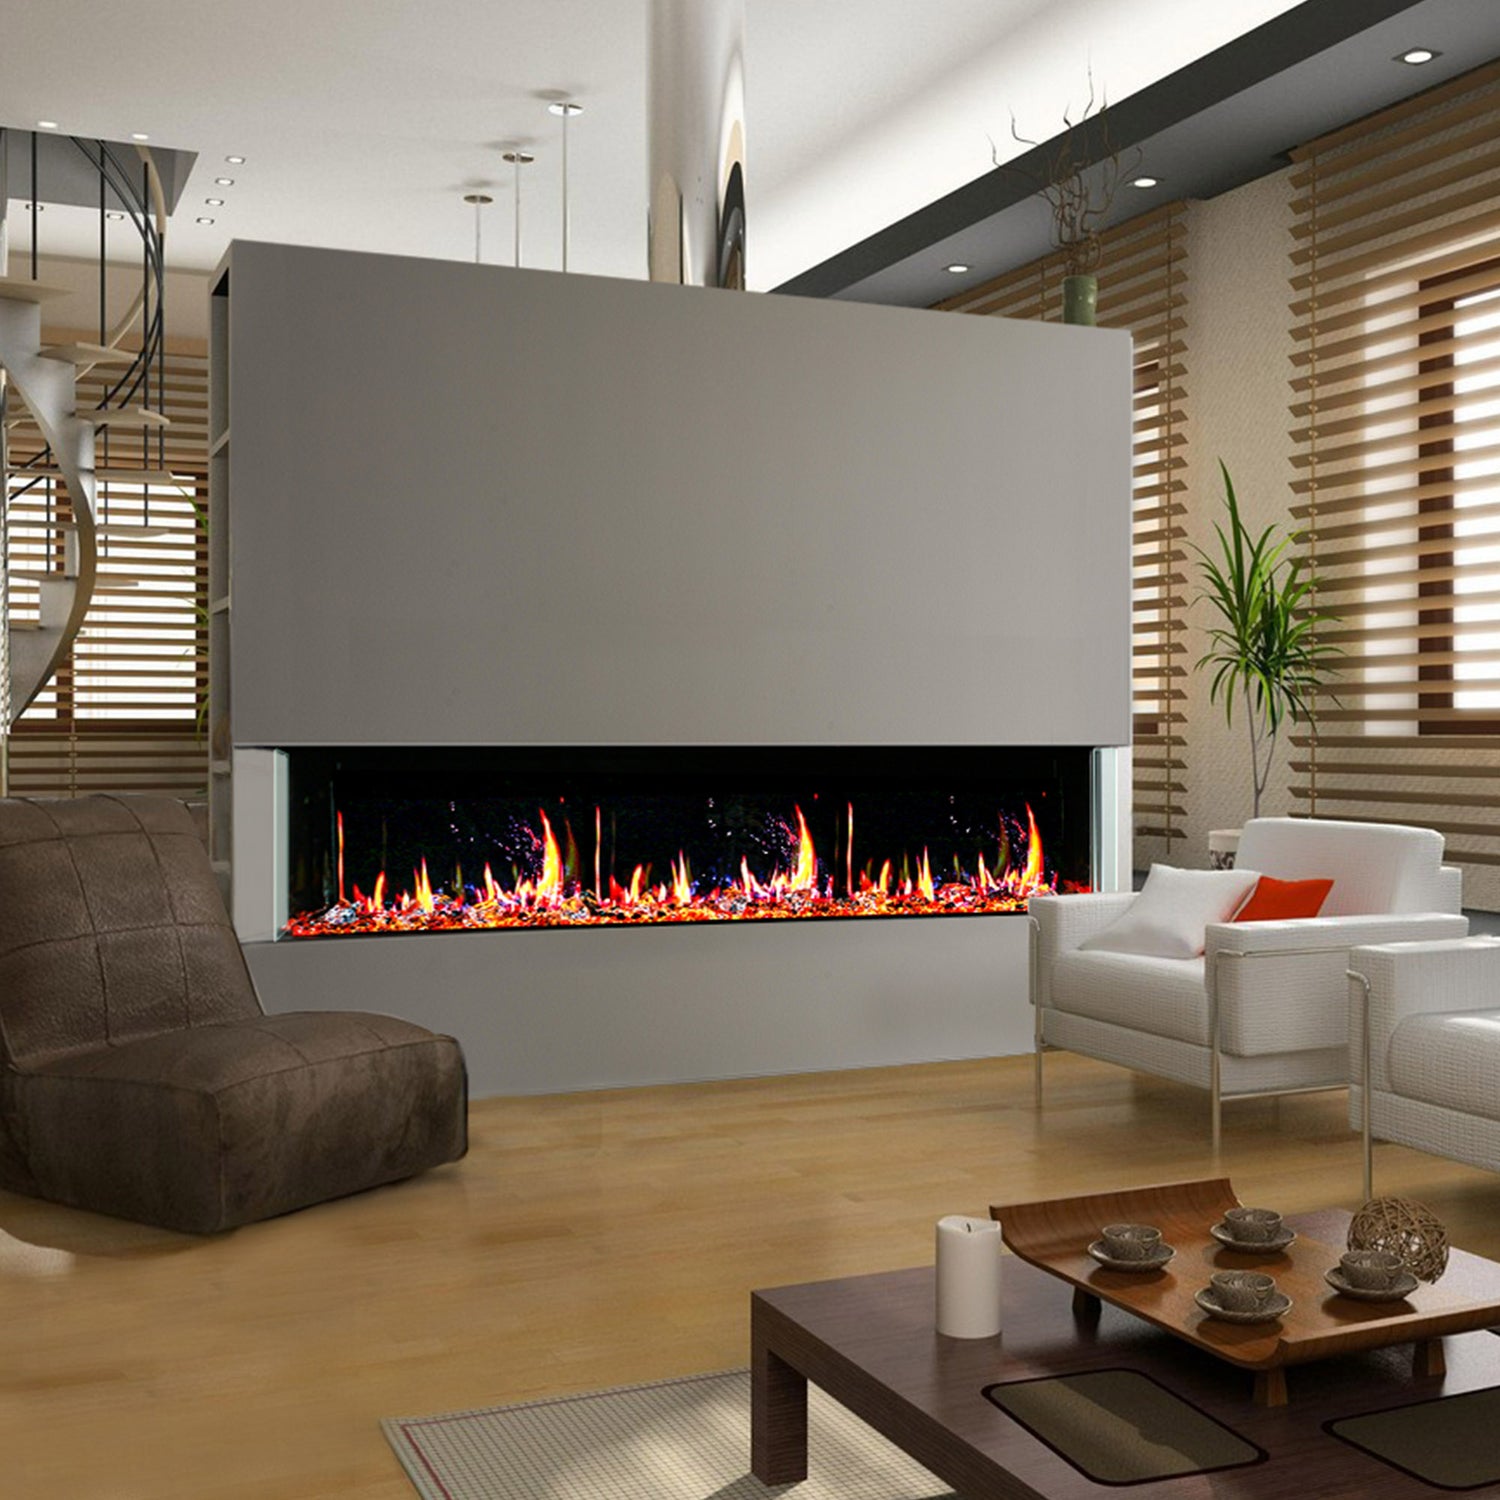 TriSatar 3-Side electric fireplace 72inch smart | zopaflame.com 